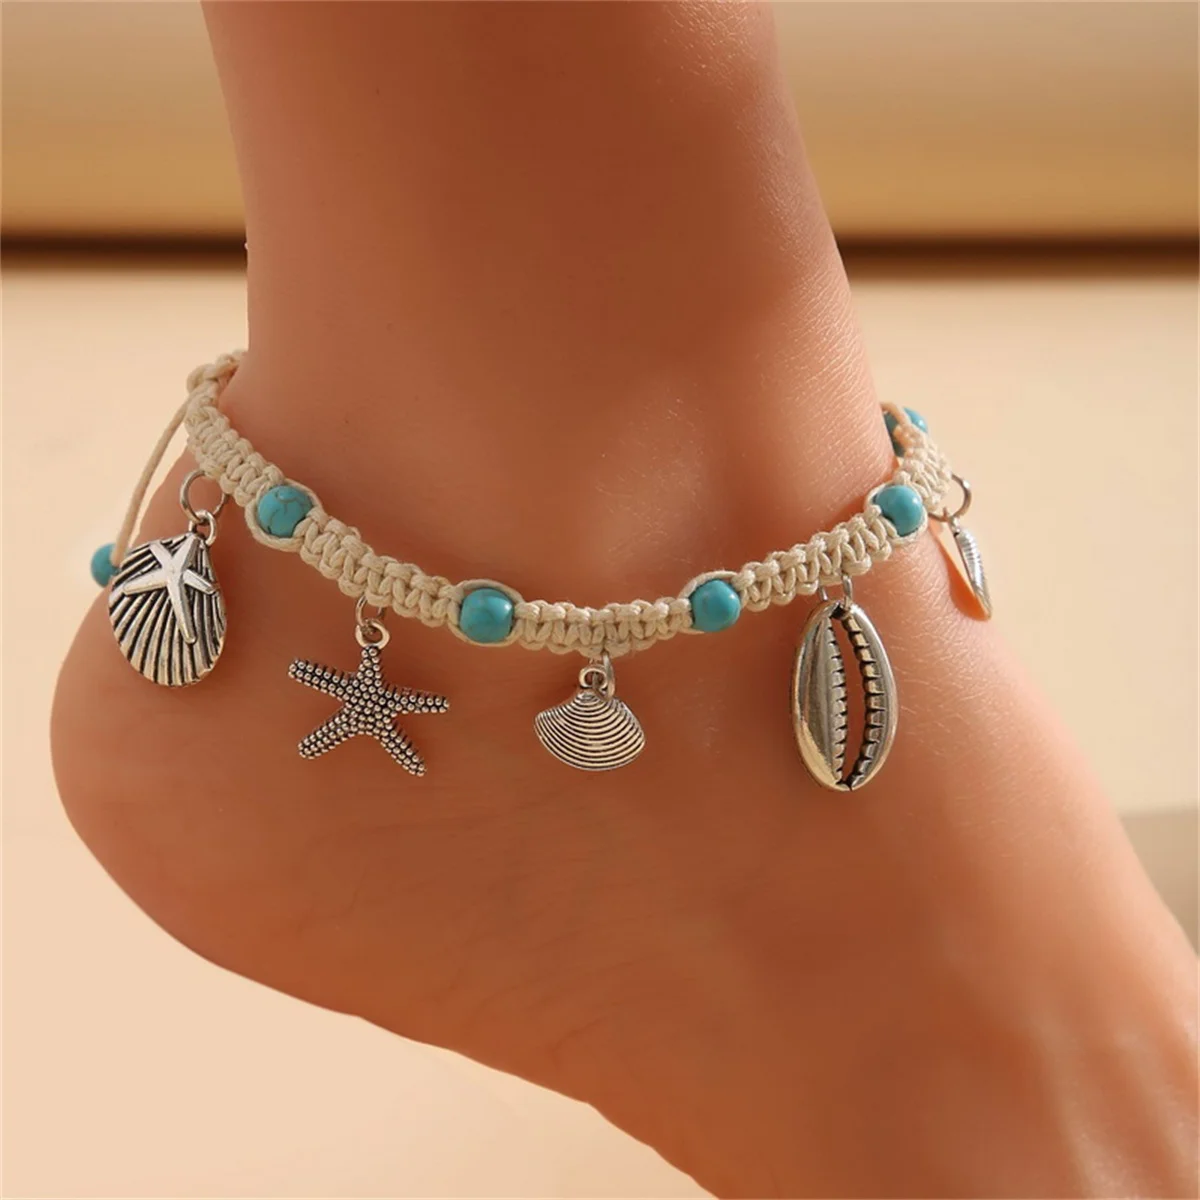 

Bohemia Metal Shell Starfish Anklets For Women Handmade Woven Rope Chain Wave Sandals Barefoot Beach Ankle Bracelet Foot Jewelry